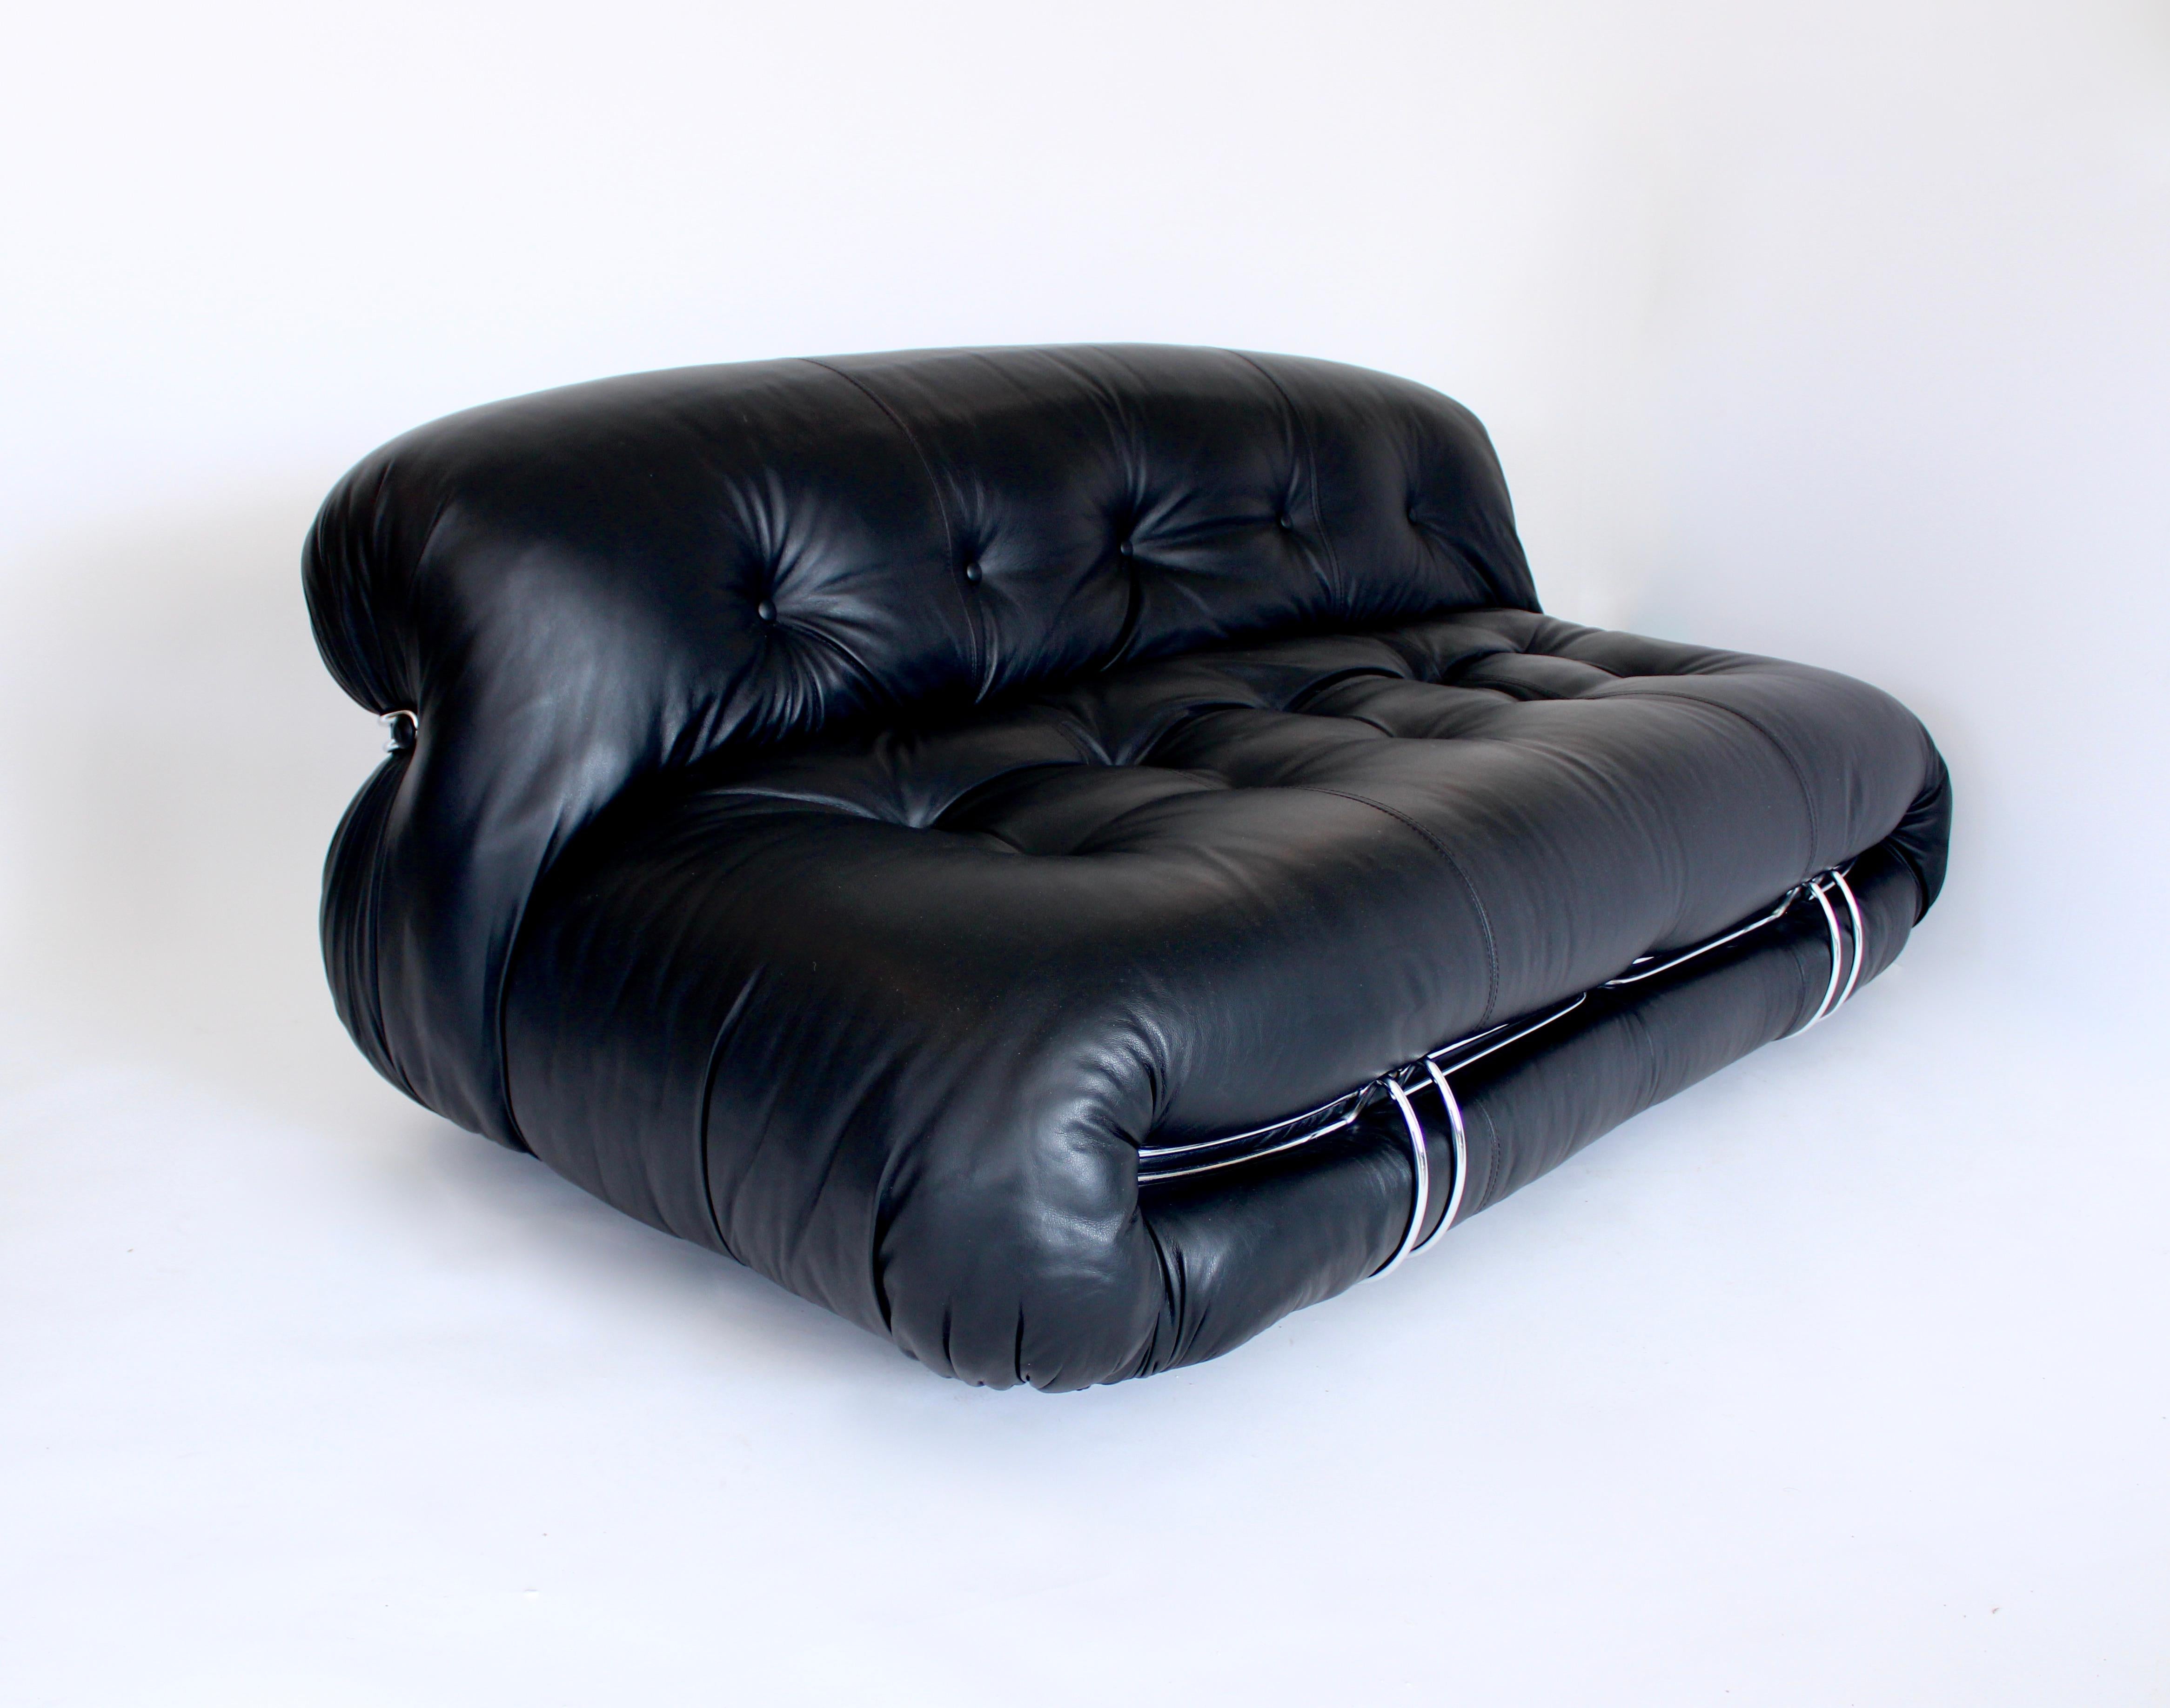 The Soriana was designed in both the settee and the sofa length.
The Soriana was designed for Cassina by Tobia Scarpa won a “Compasso d’Oro” prize in 1969.
With pleated and gathered black leather sides and back the sofa is supported by a sculptural